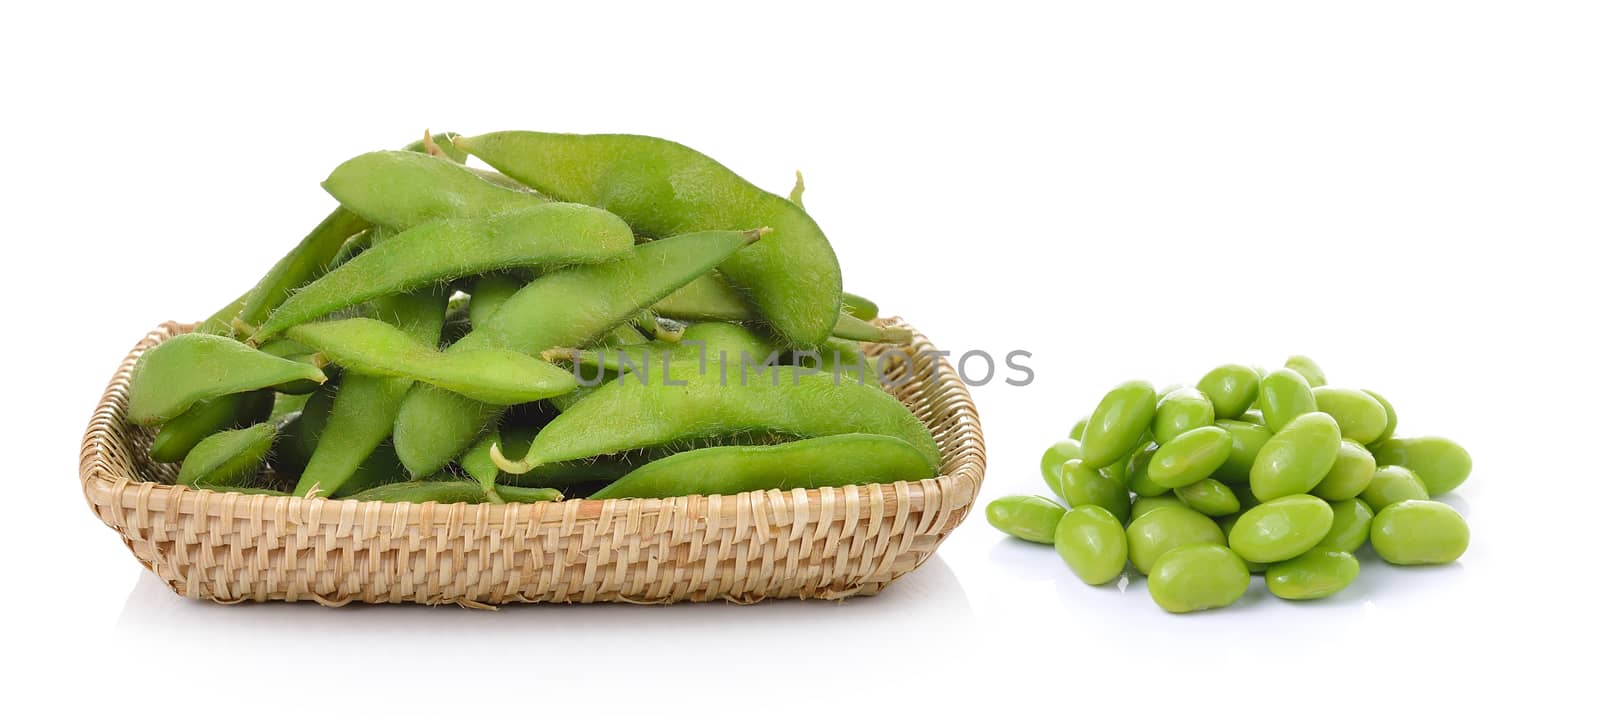 green soybeans in the basket on white background by sommai